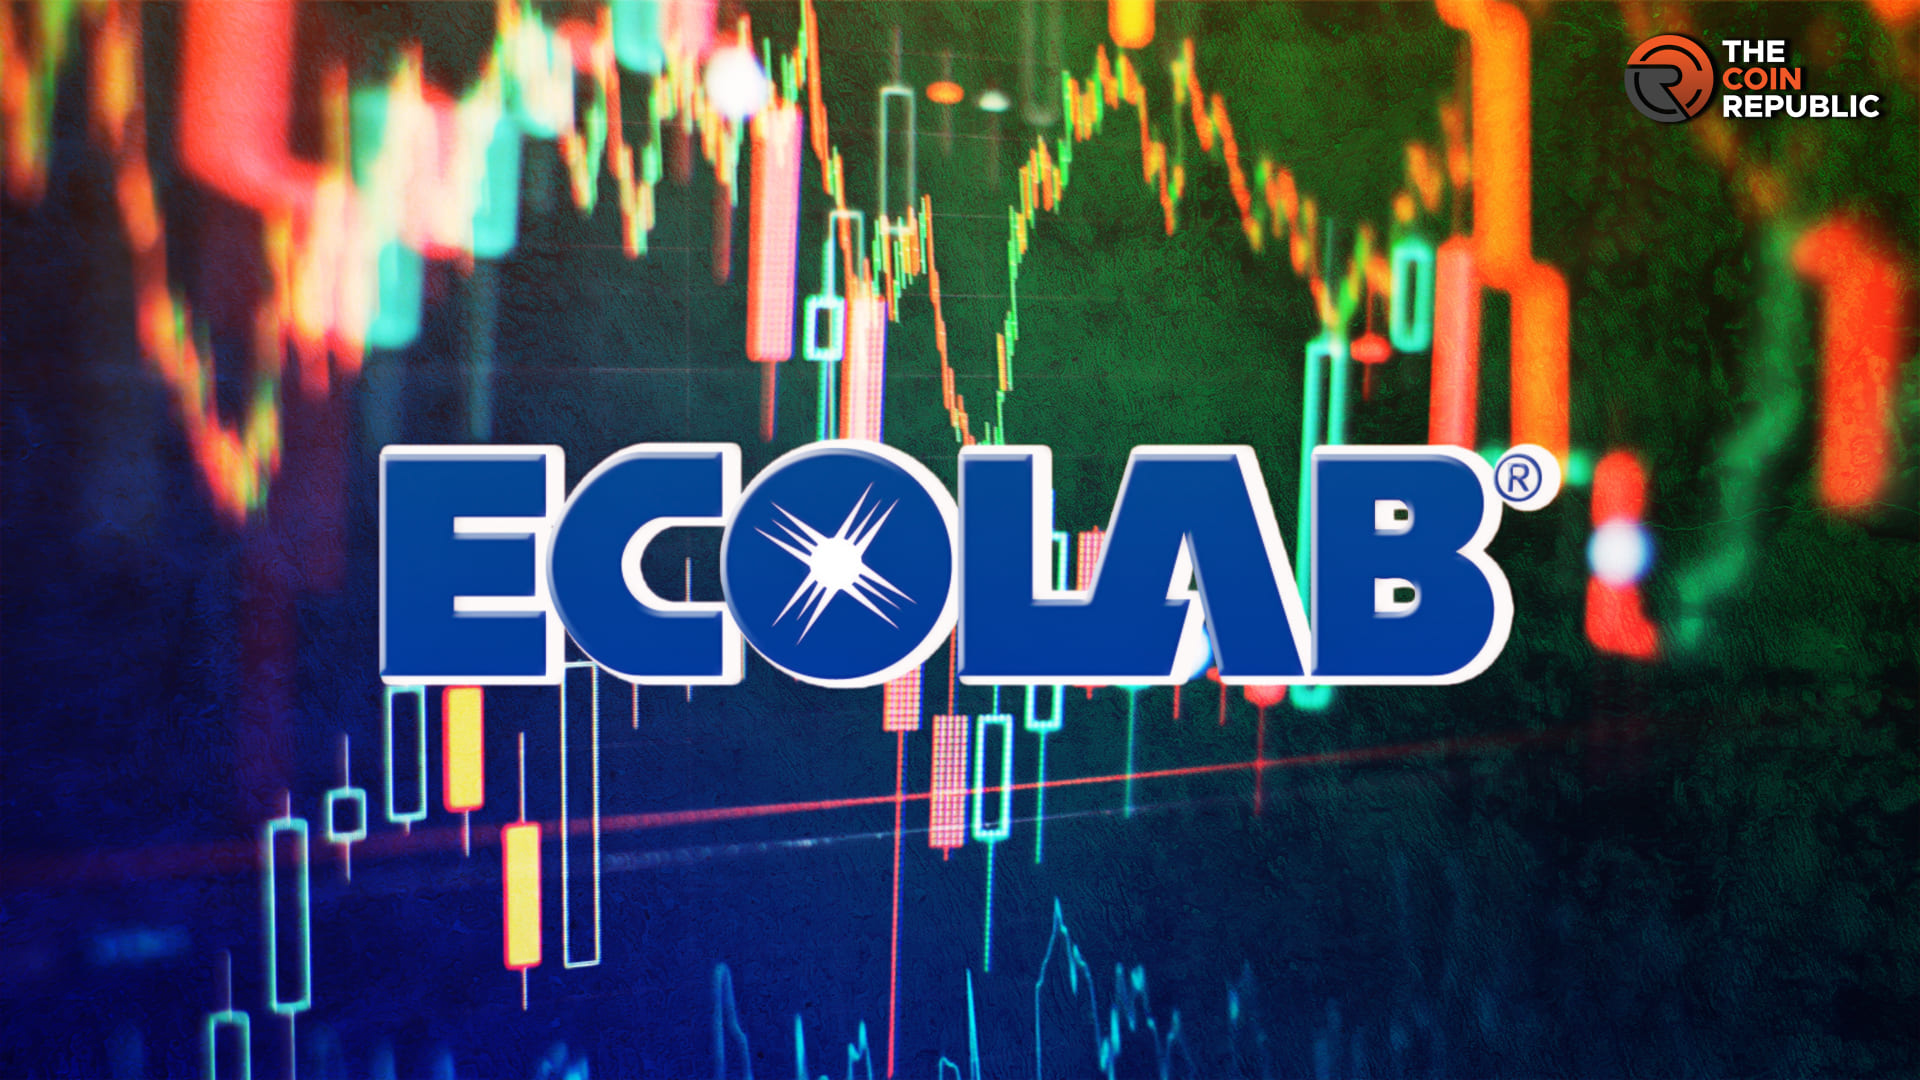 Ecolab Stock Forecast: Can (NYSE: ECL) Stock Rise Or Fall?